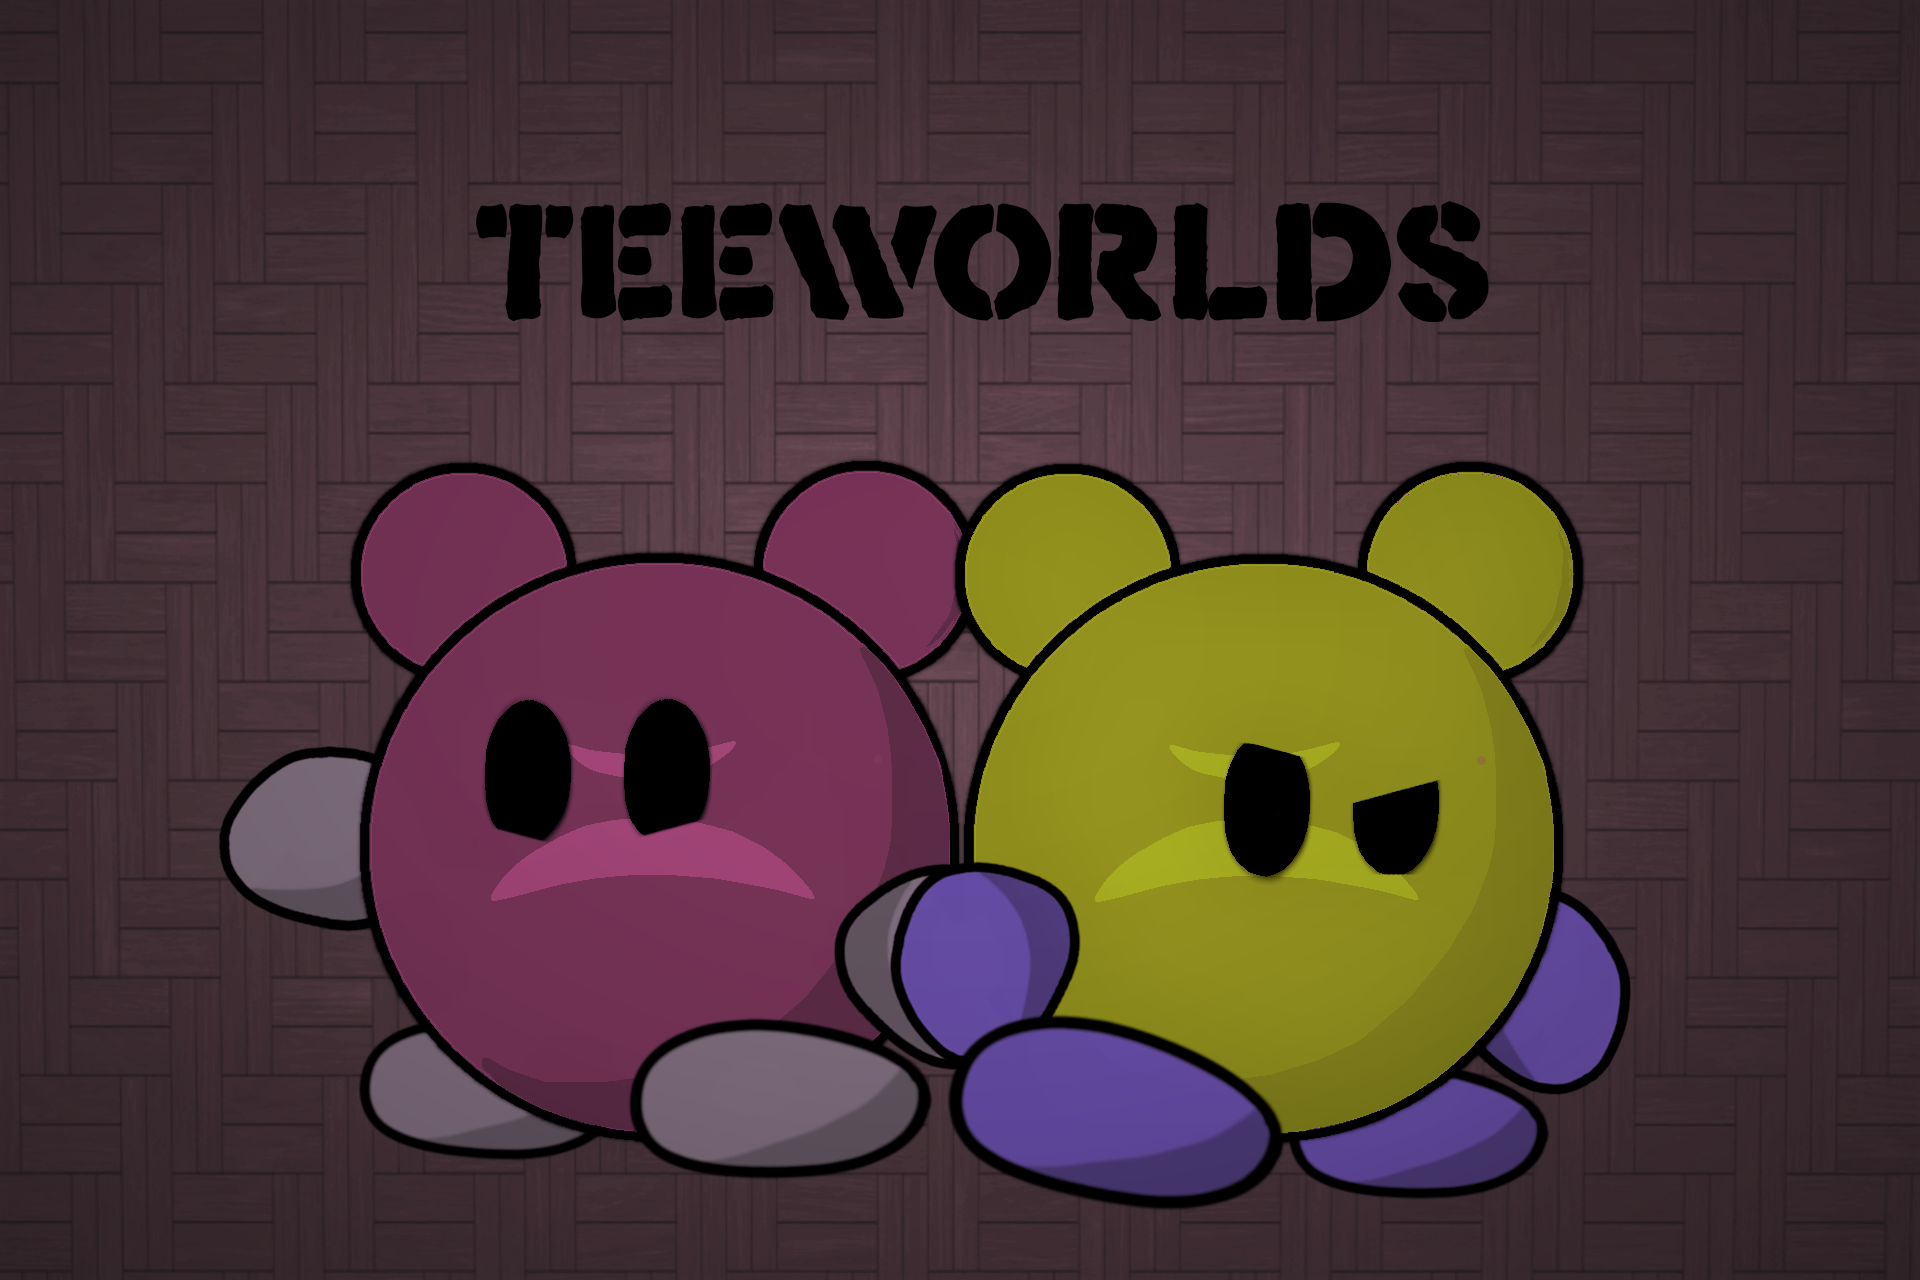 Teeworlds_twins.png